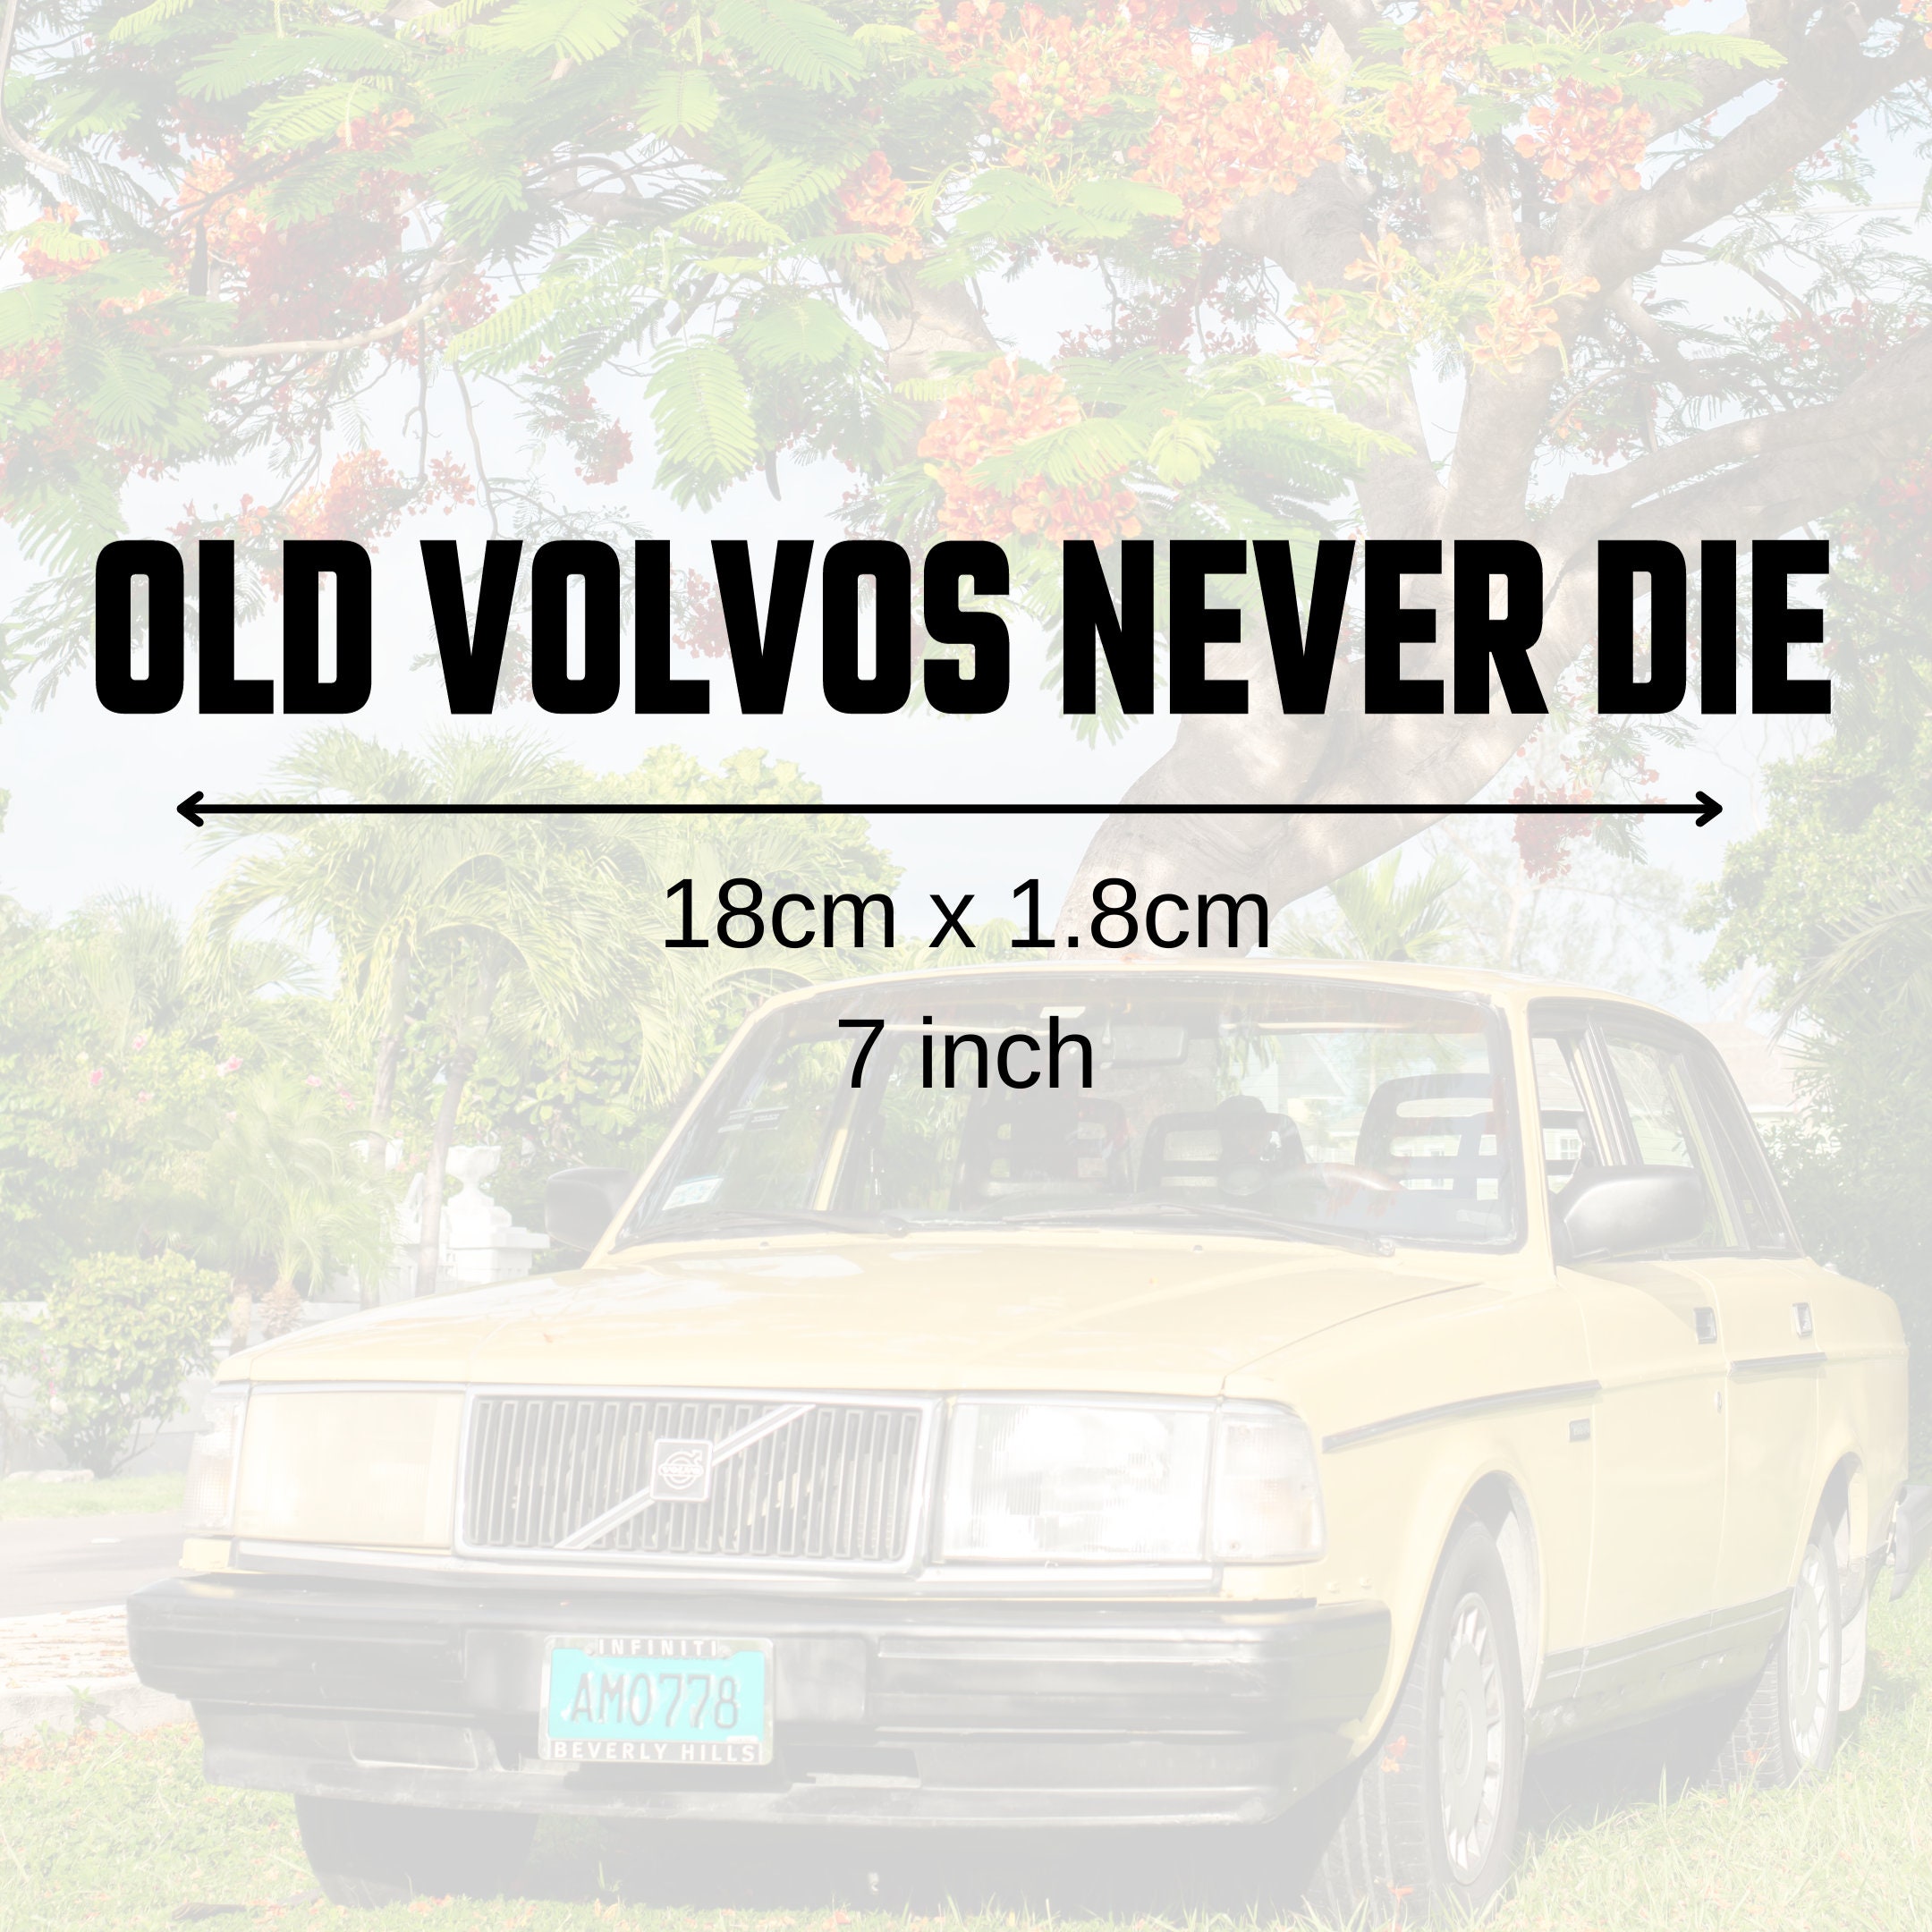 Old Volvos Never Die Vinyl Decal Volvo Funny Sticker Drift Rally Dub Stance  Classic Car Slap Swede Swedish the Volv 240 740 Wagen 